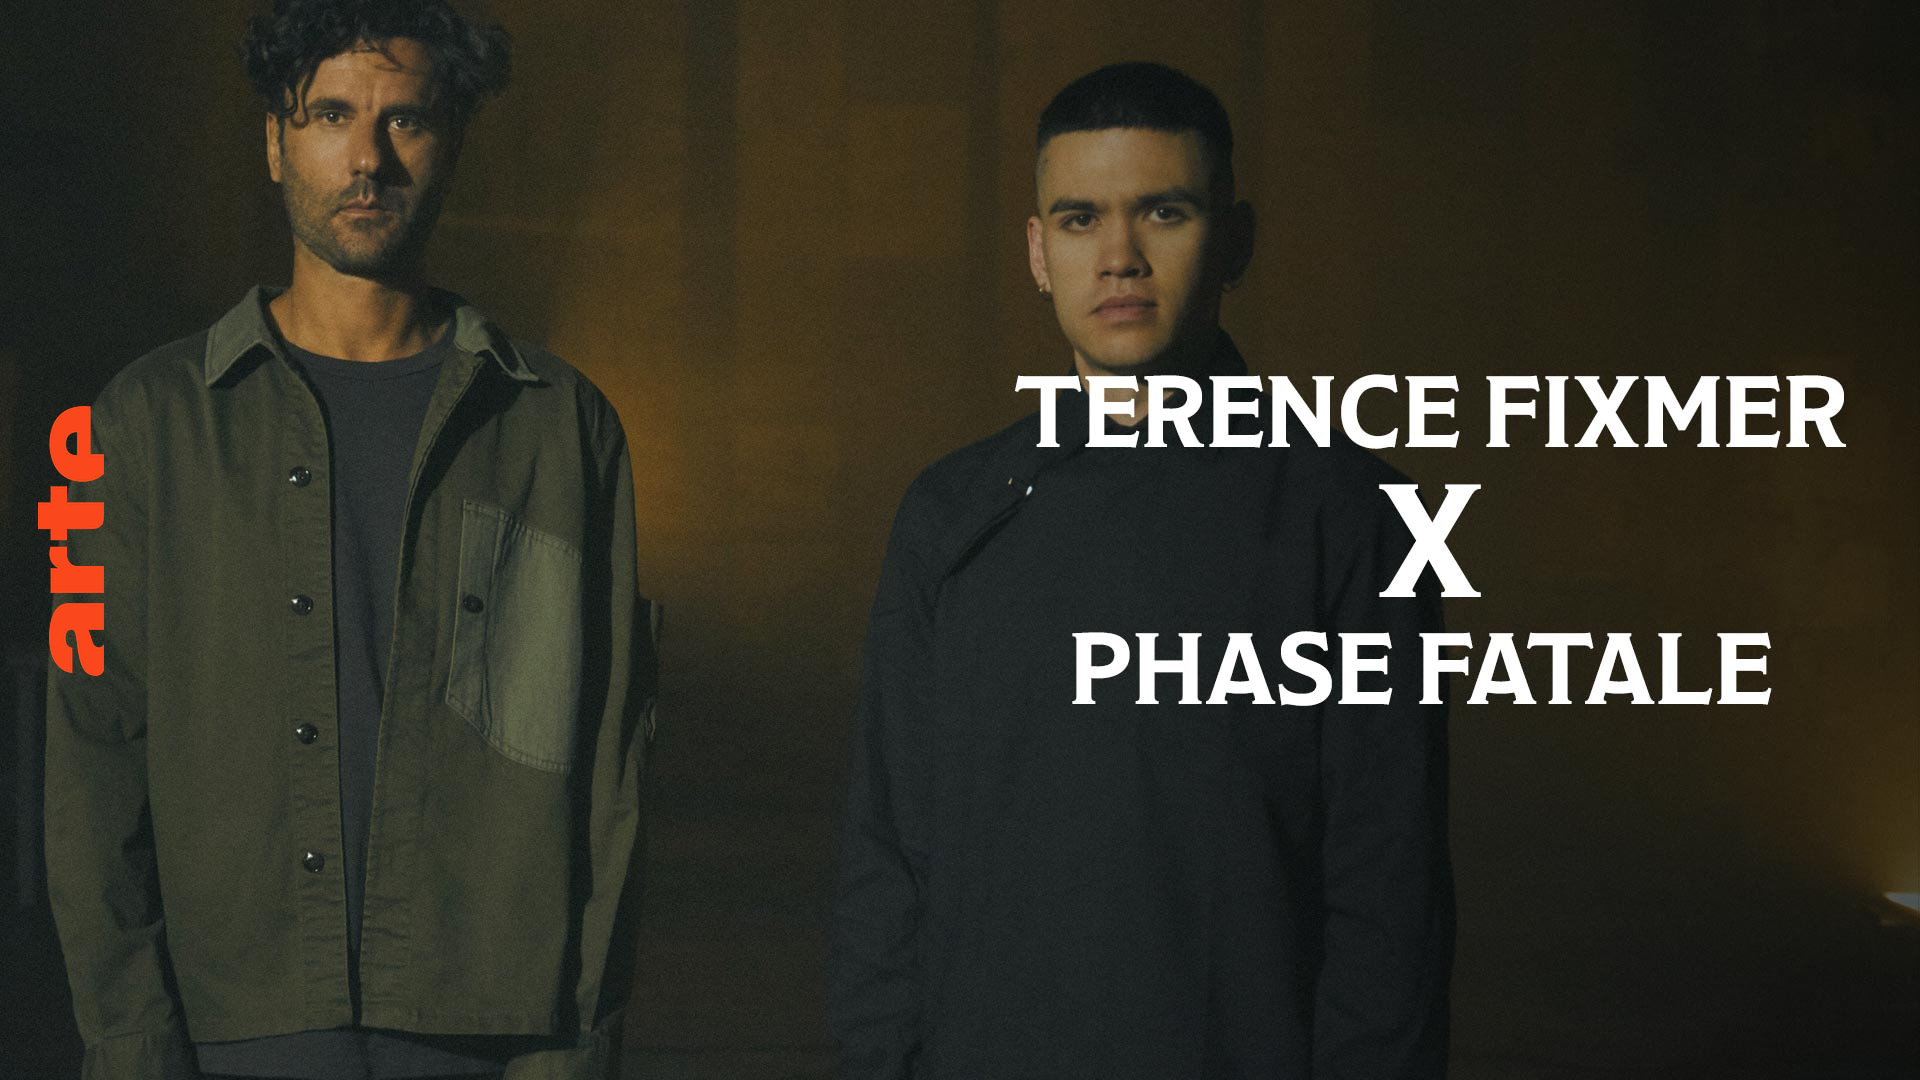 Terence Fixmer X Phase Fatale